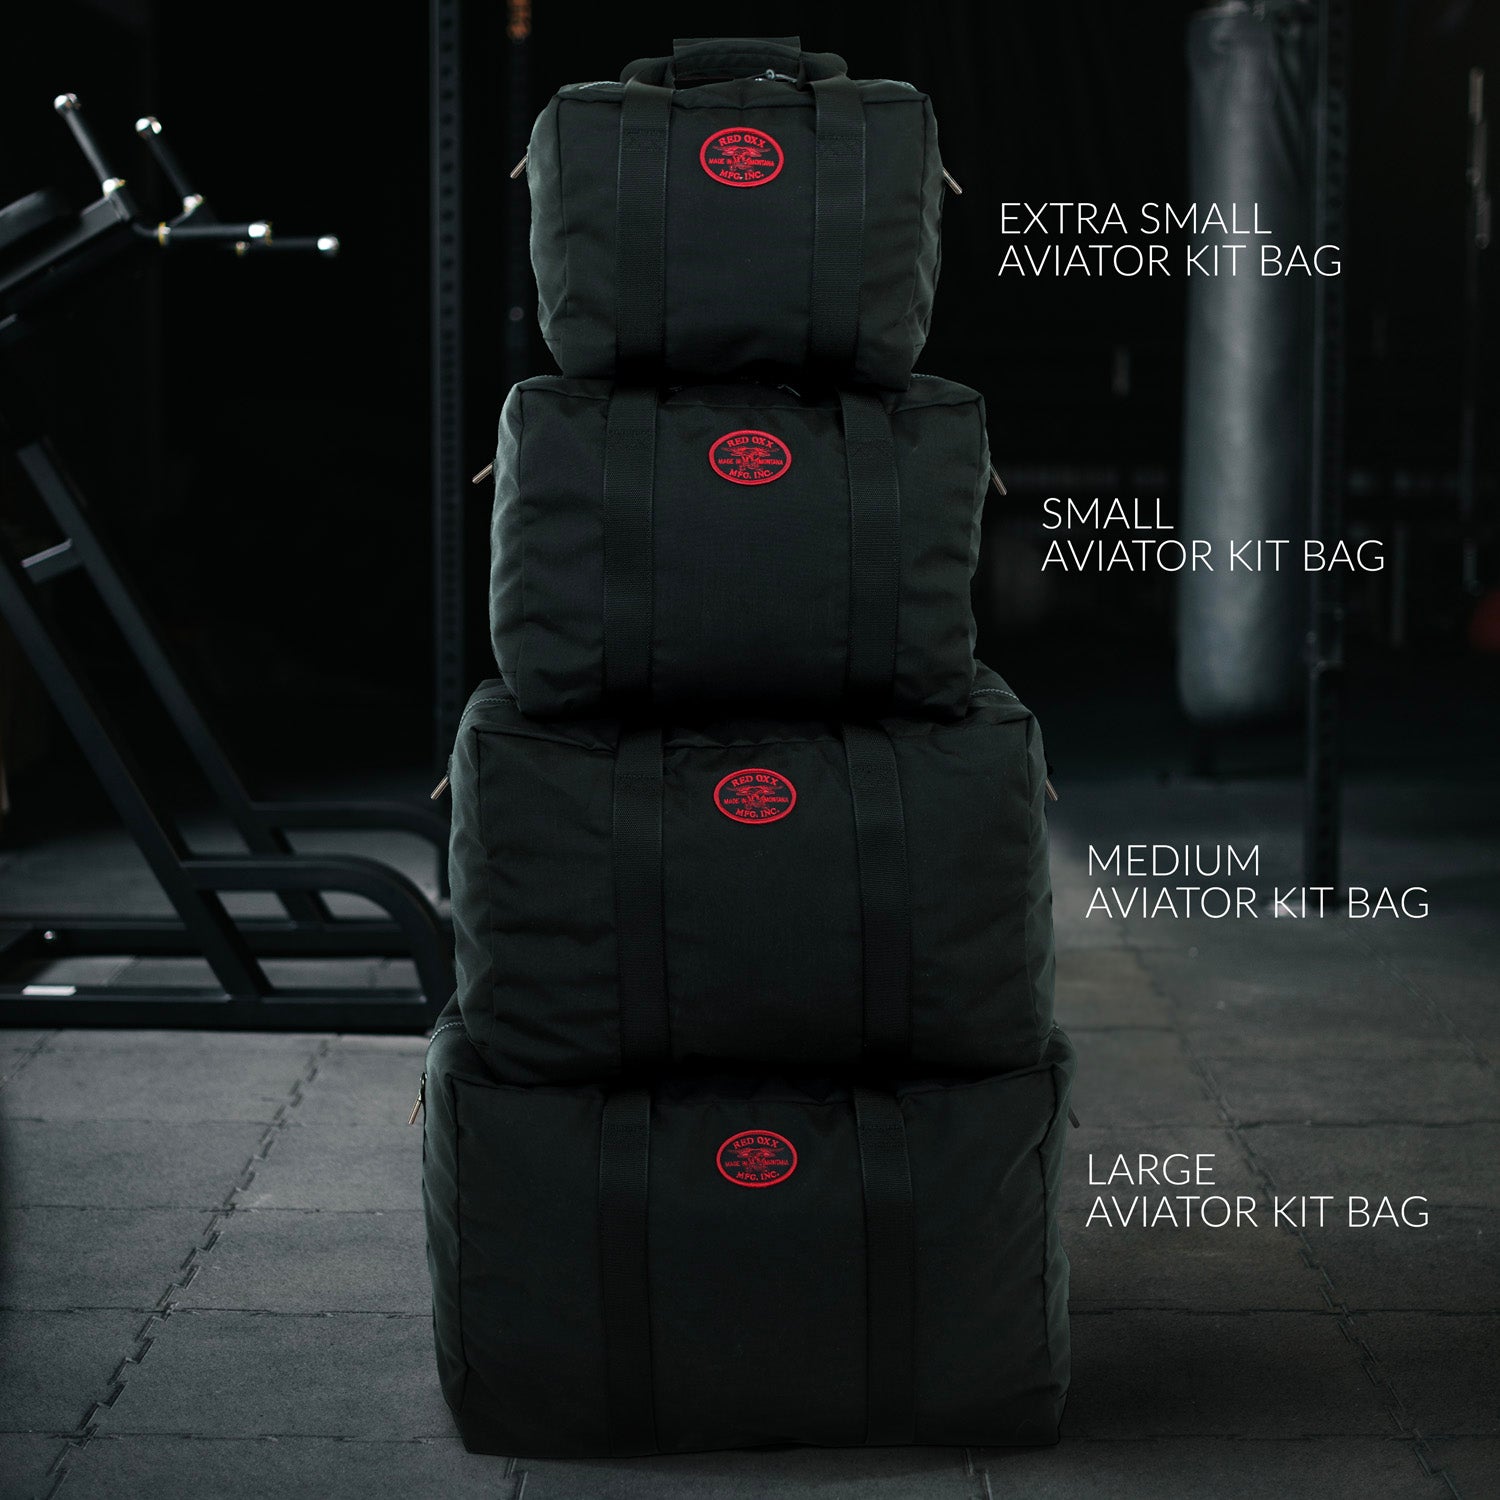 Full set of Red Oxx aviator kit bags from top Extra small, Small ,Medium Large kit bags. 